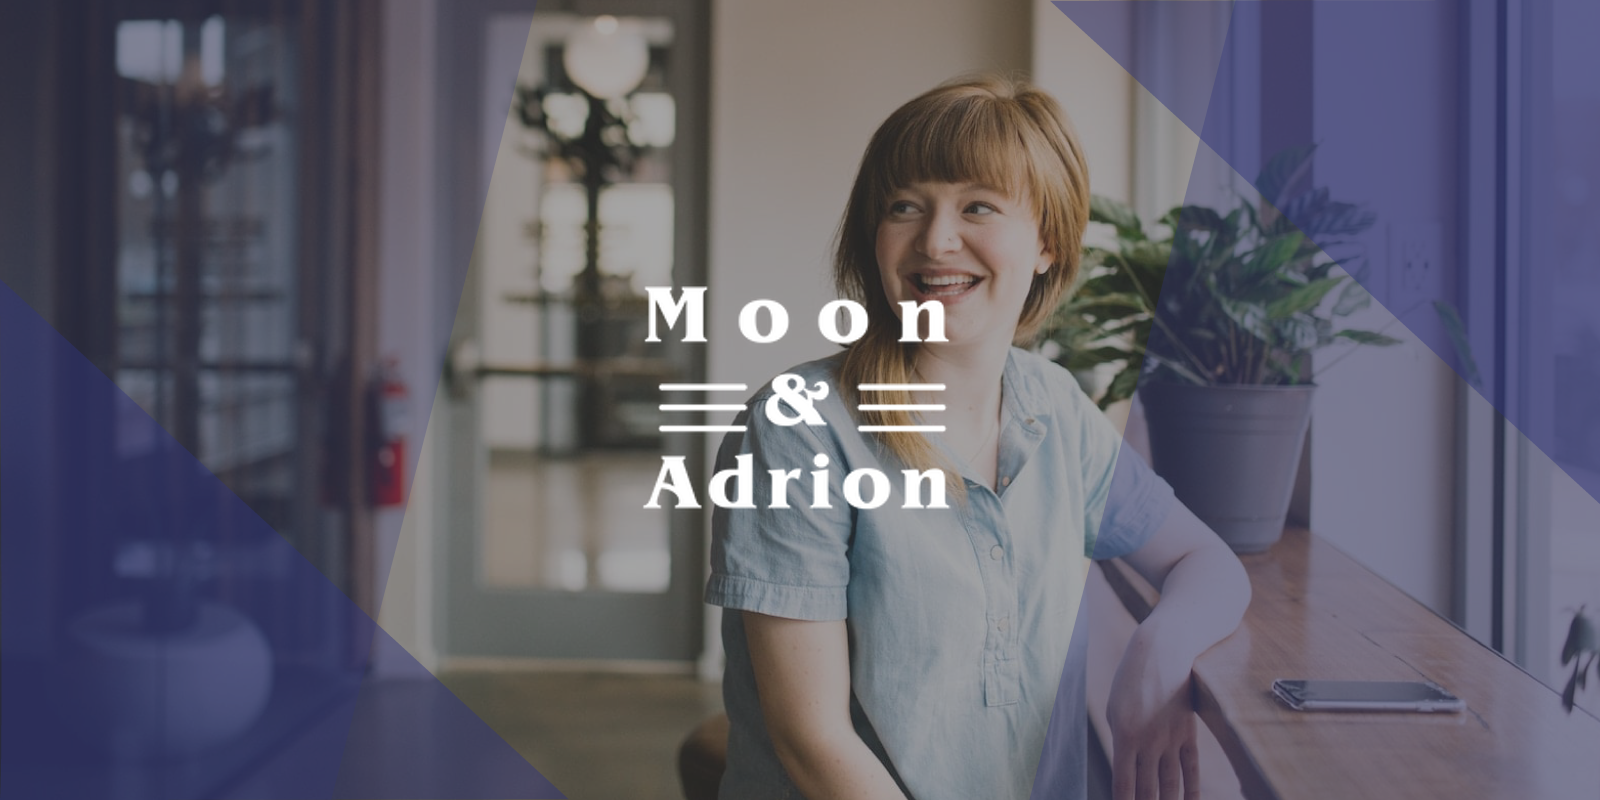 Moon and Adrion Insurance